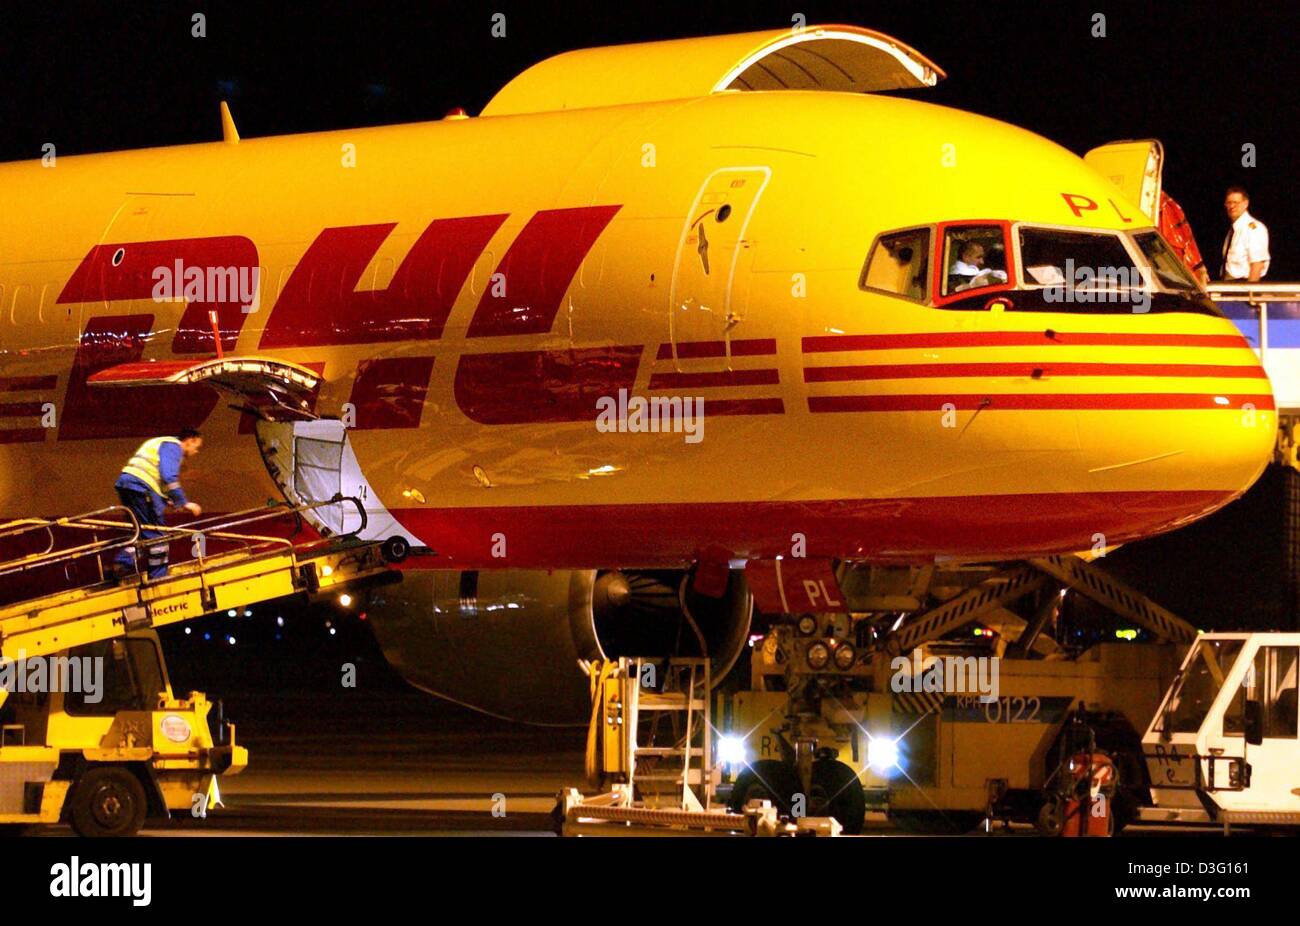 (dpa) - A cargo aircraft is being unloaded at night at the airport in Frankfurt, Germany, 28 March 2003. In the course of the ongoing rebranding of the cargo  company DHL the fleet of aircrafts will be painted yellow. DHL's logistic partner, the Deutsch Post (german mail), will also apply this colour scheme to their fleet of cars and and transport vehicles. So far aircraft and curi Stock Photo